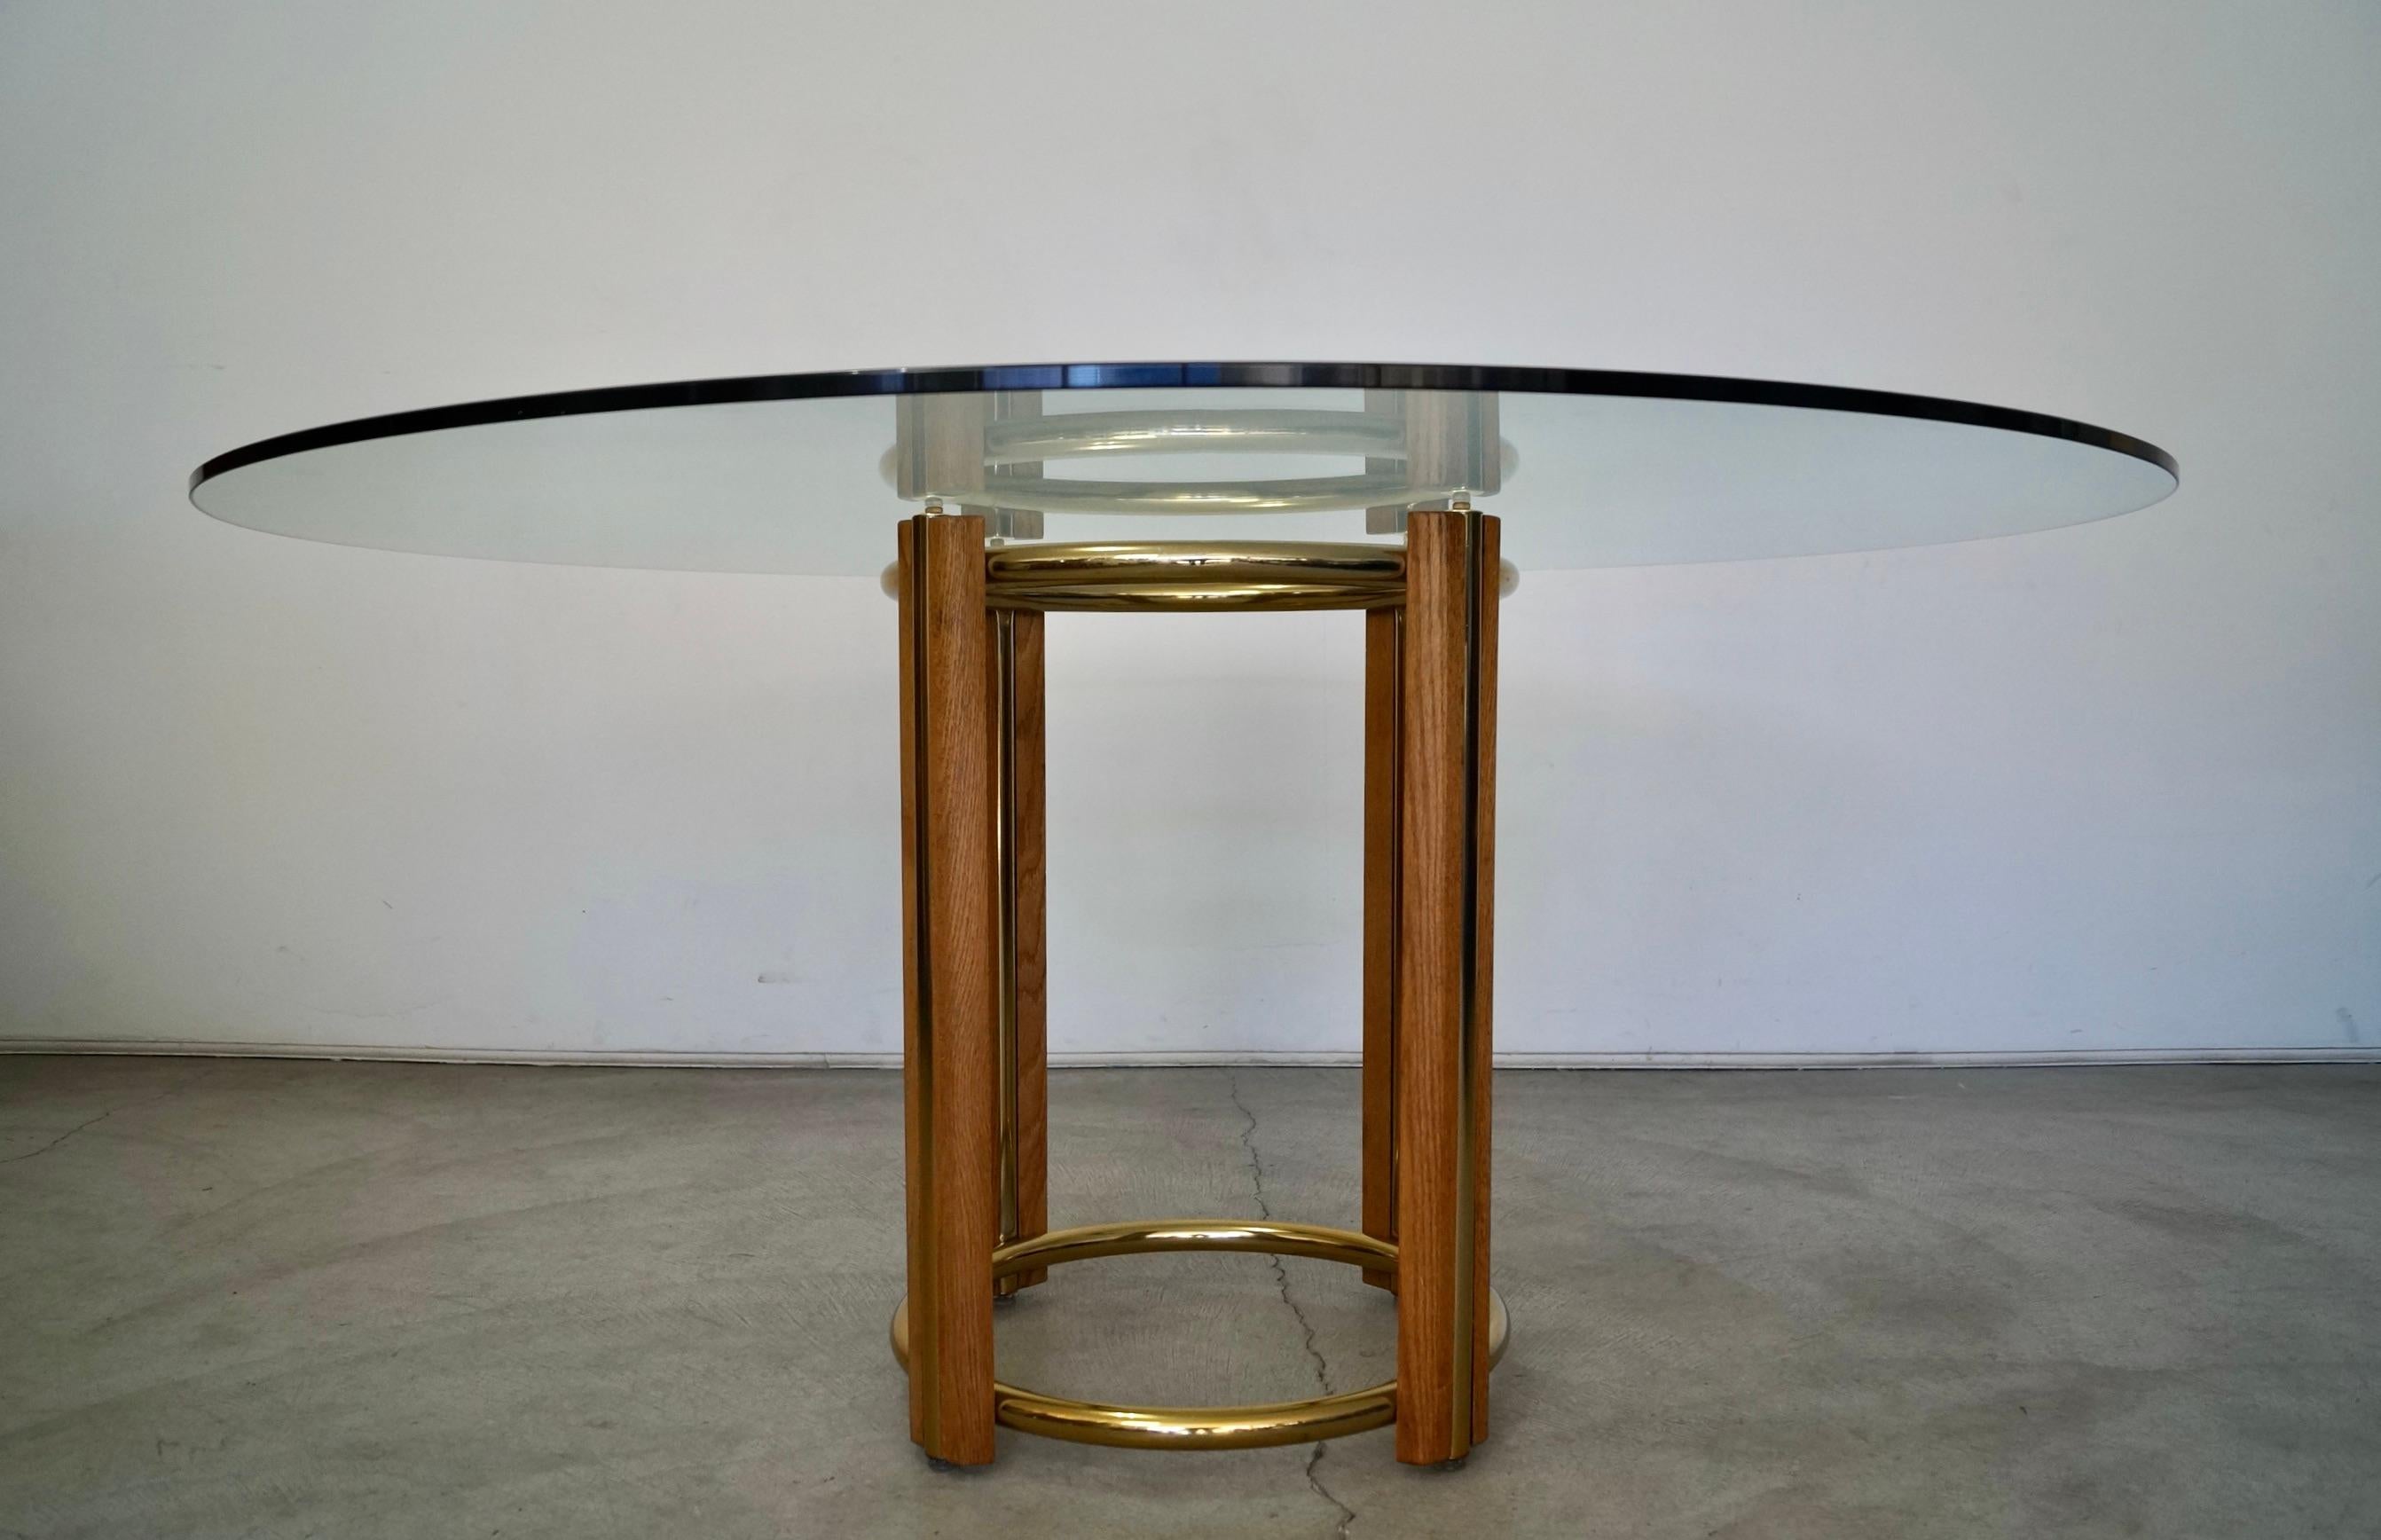 Vintage 1970s Mid-Century Modern dining table for sale. Has a solid oak base with brass rings and brass inserted into the oak. The has a half inch thick large round glass top. This table is in incredible condition. The glass has no chips and looks